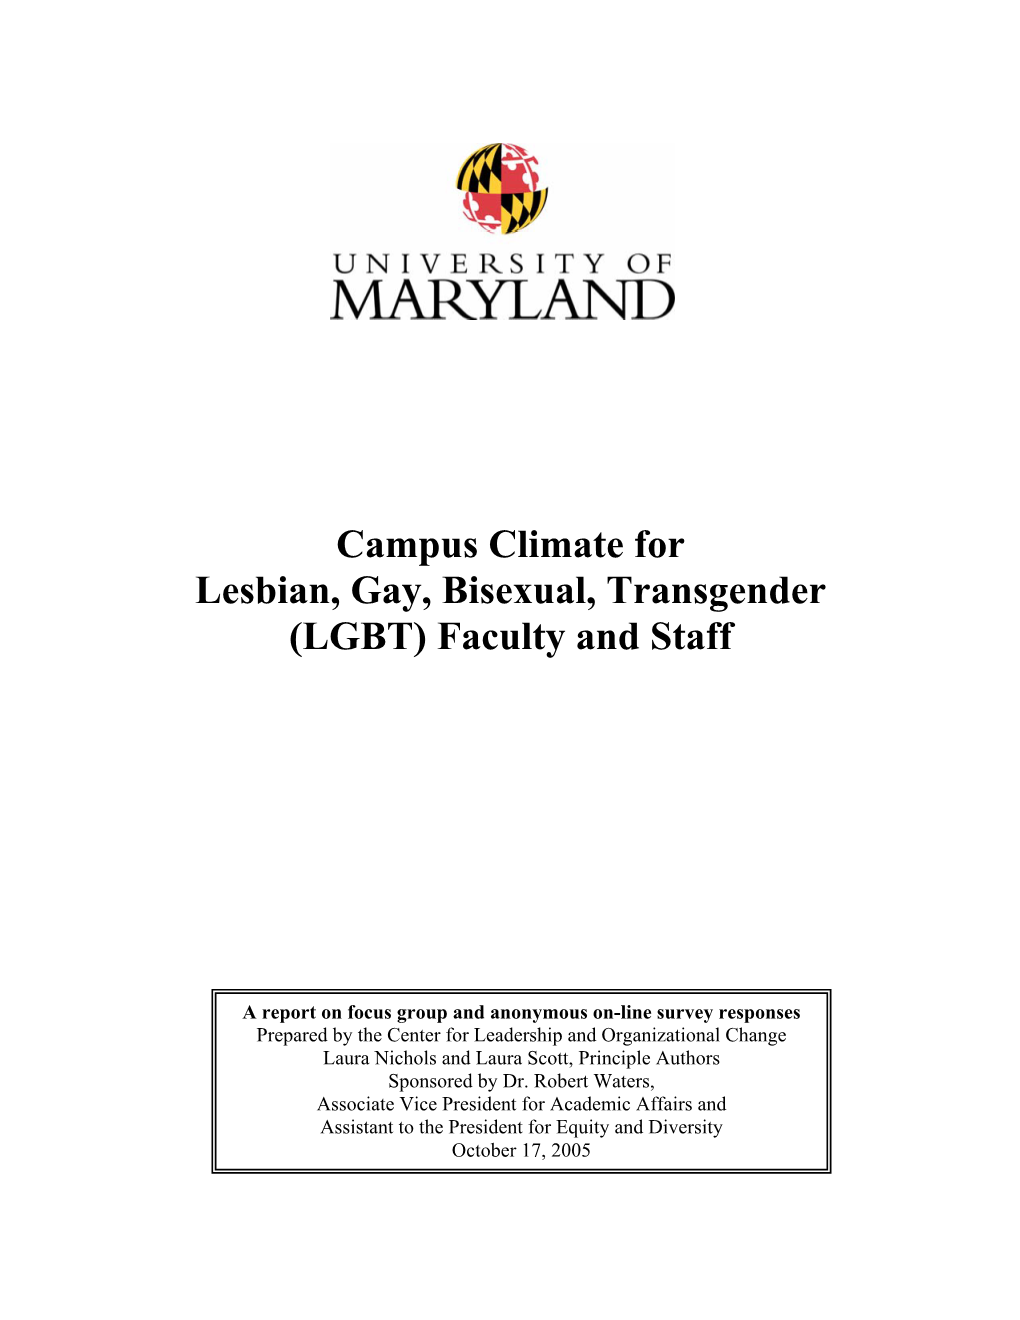 Campus Climate for Lesbian, Gay, Bisexual, Transgender (LGBT) Faculty and Staff